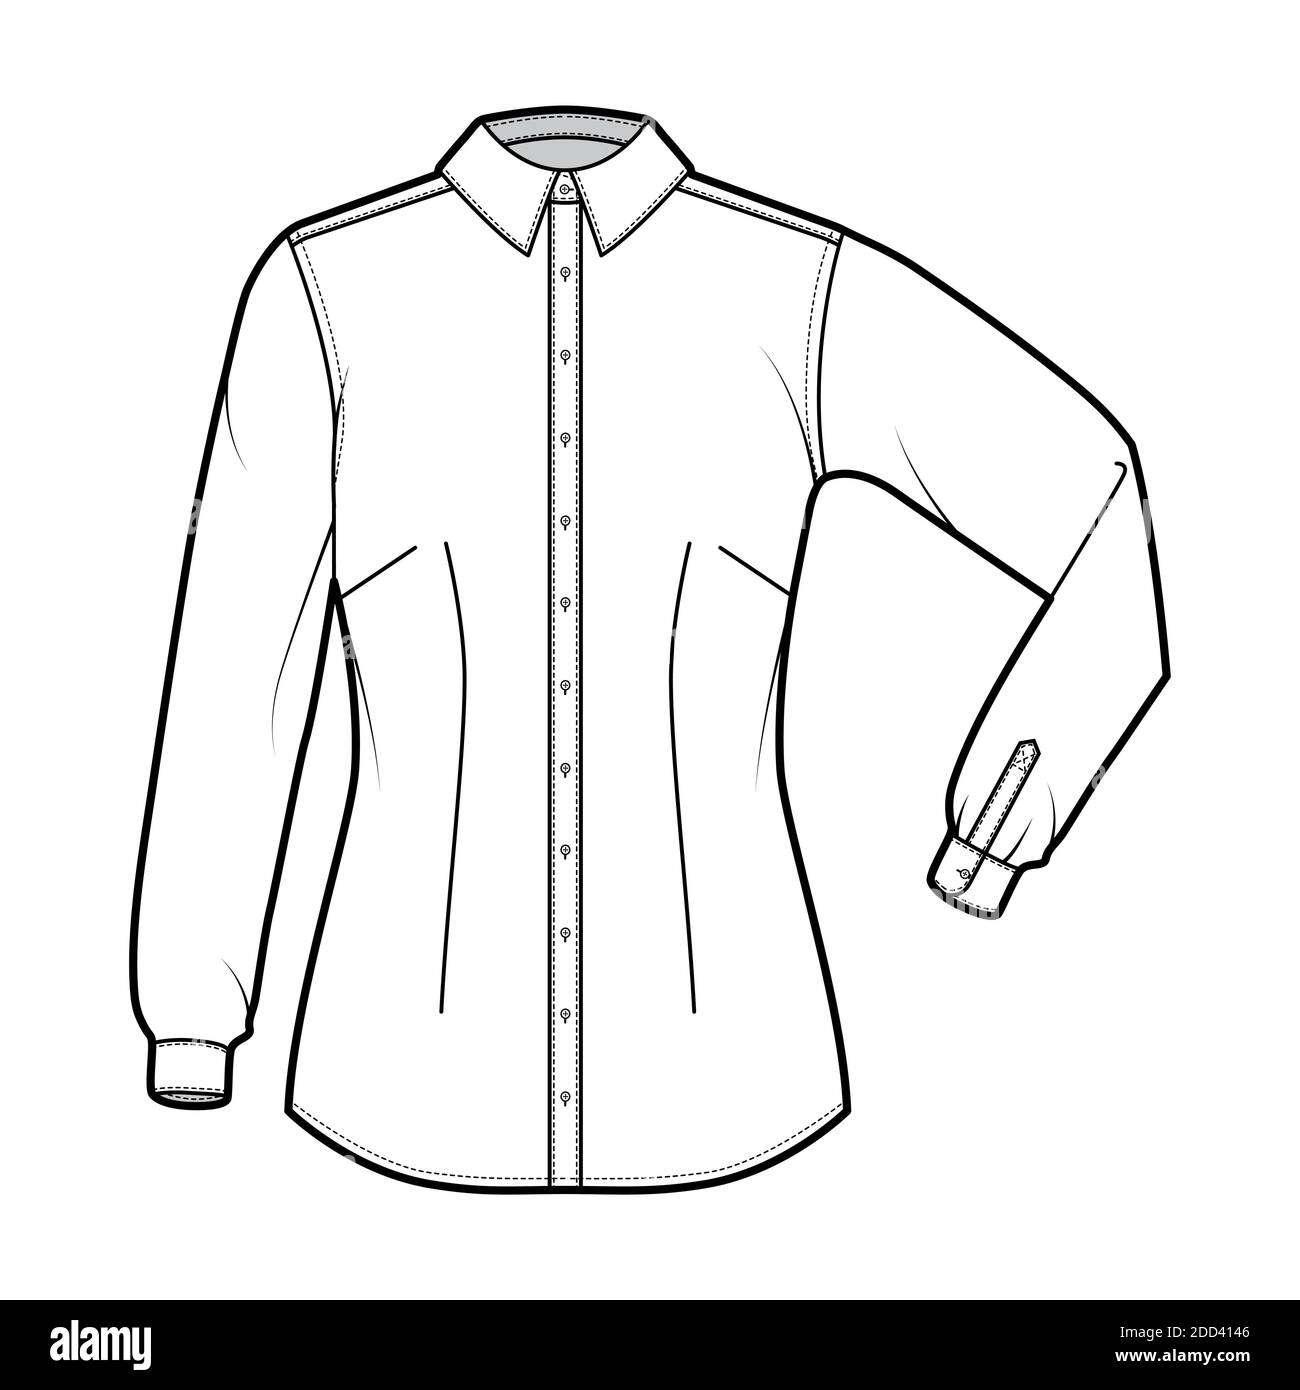 4887 Formal Shirt Fashion Sketch Images Stock Photos  Vectors   Shutterstock